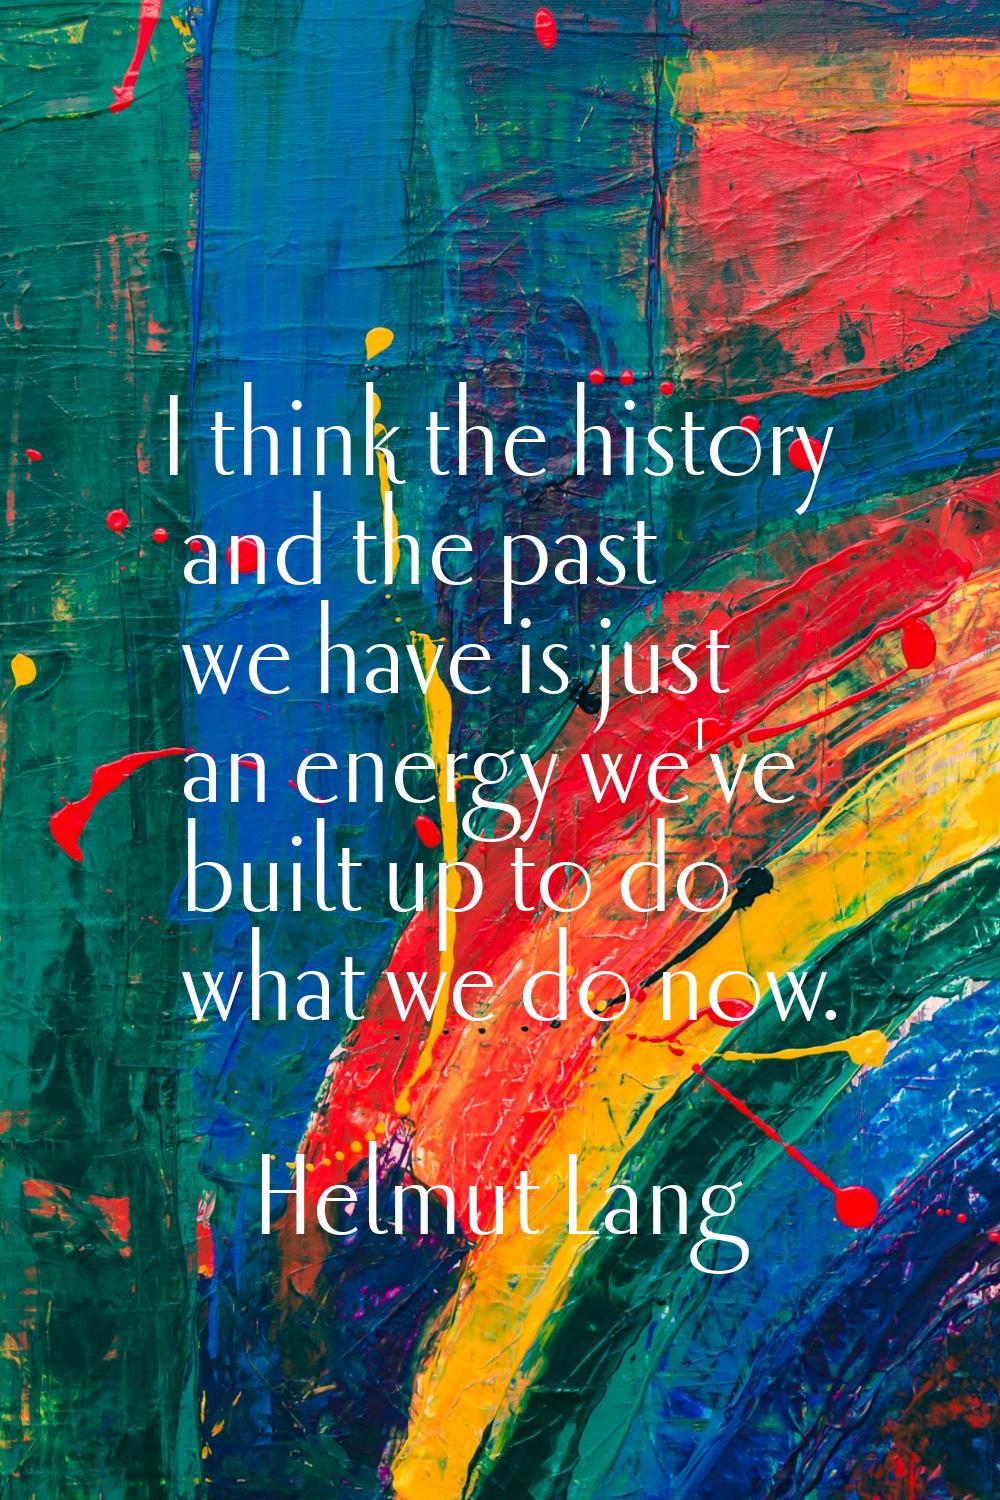 I think the history and the past we have is just an energy we've built up to do what we do now.